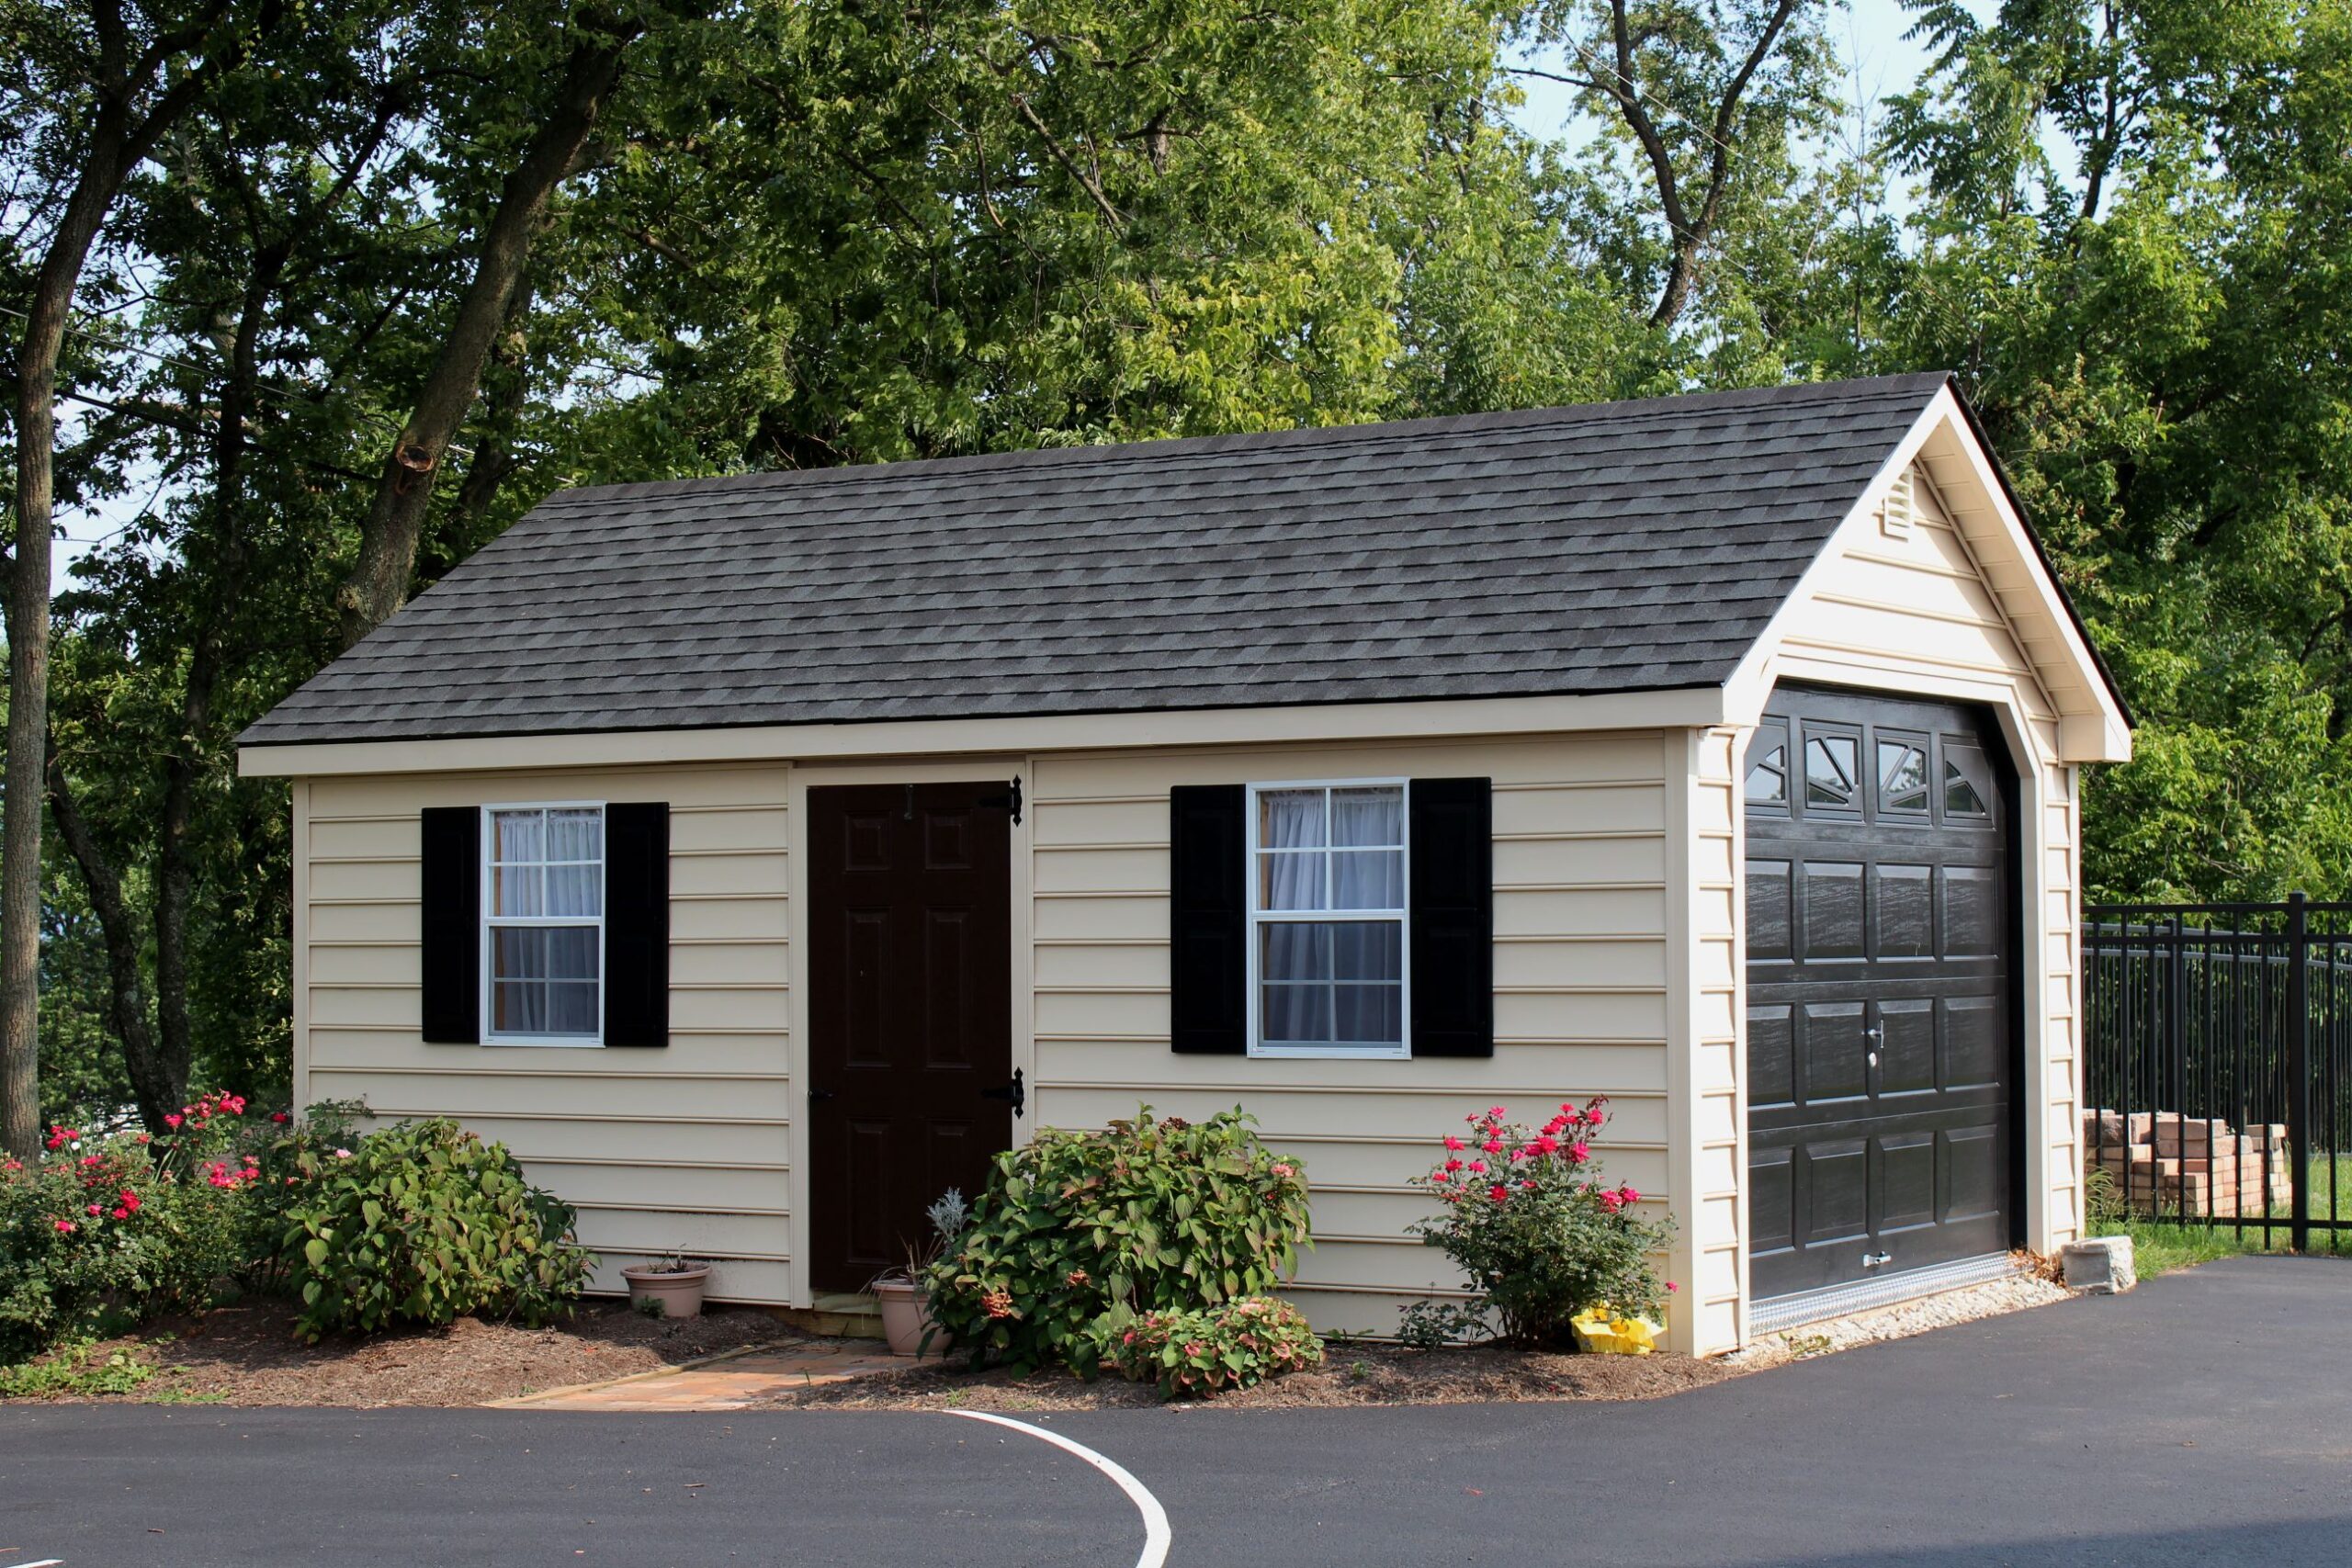 Exterior of a 1-story, 1-car Garden Shed Garage with beige siding and black doors.